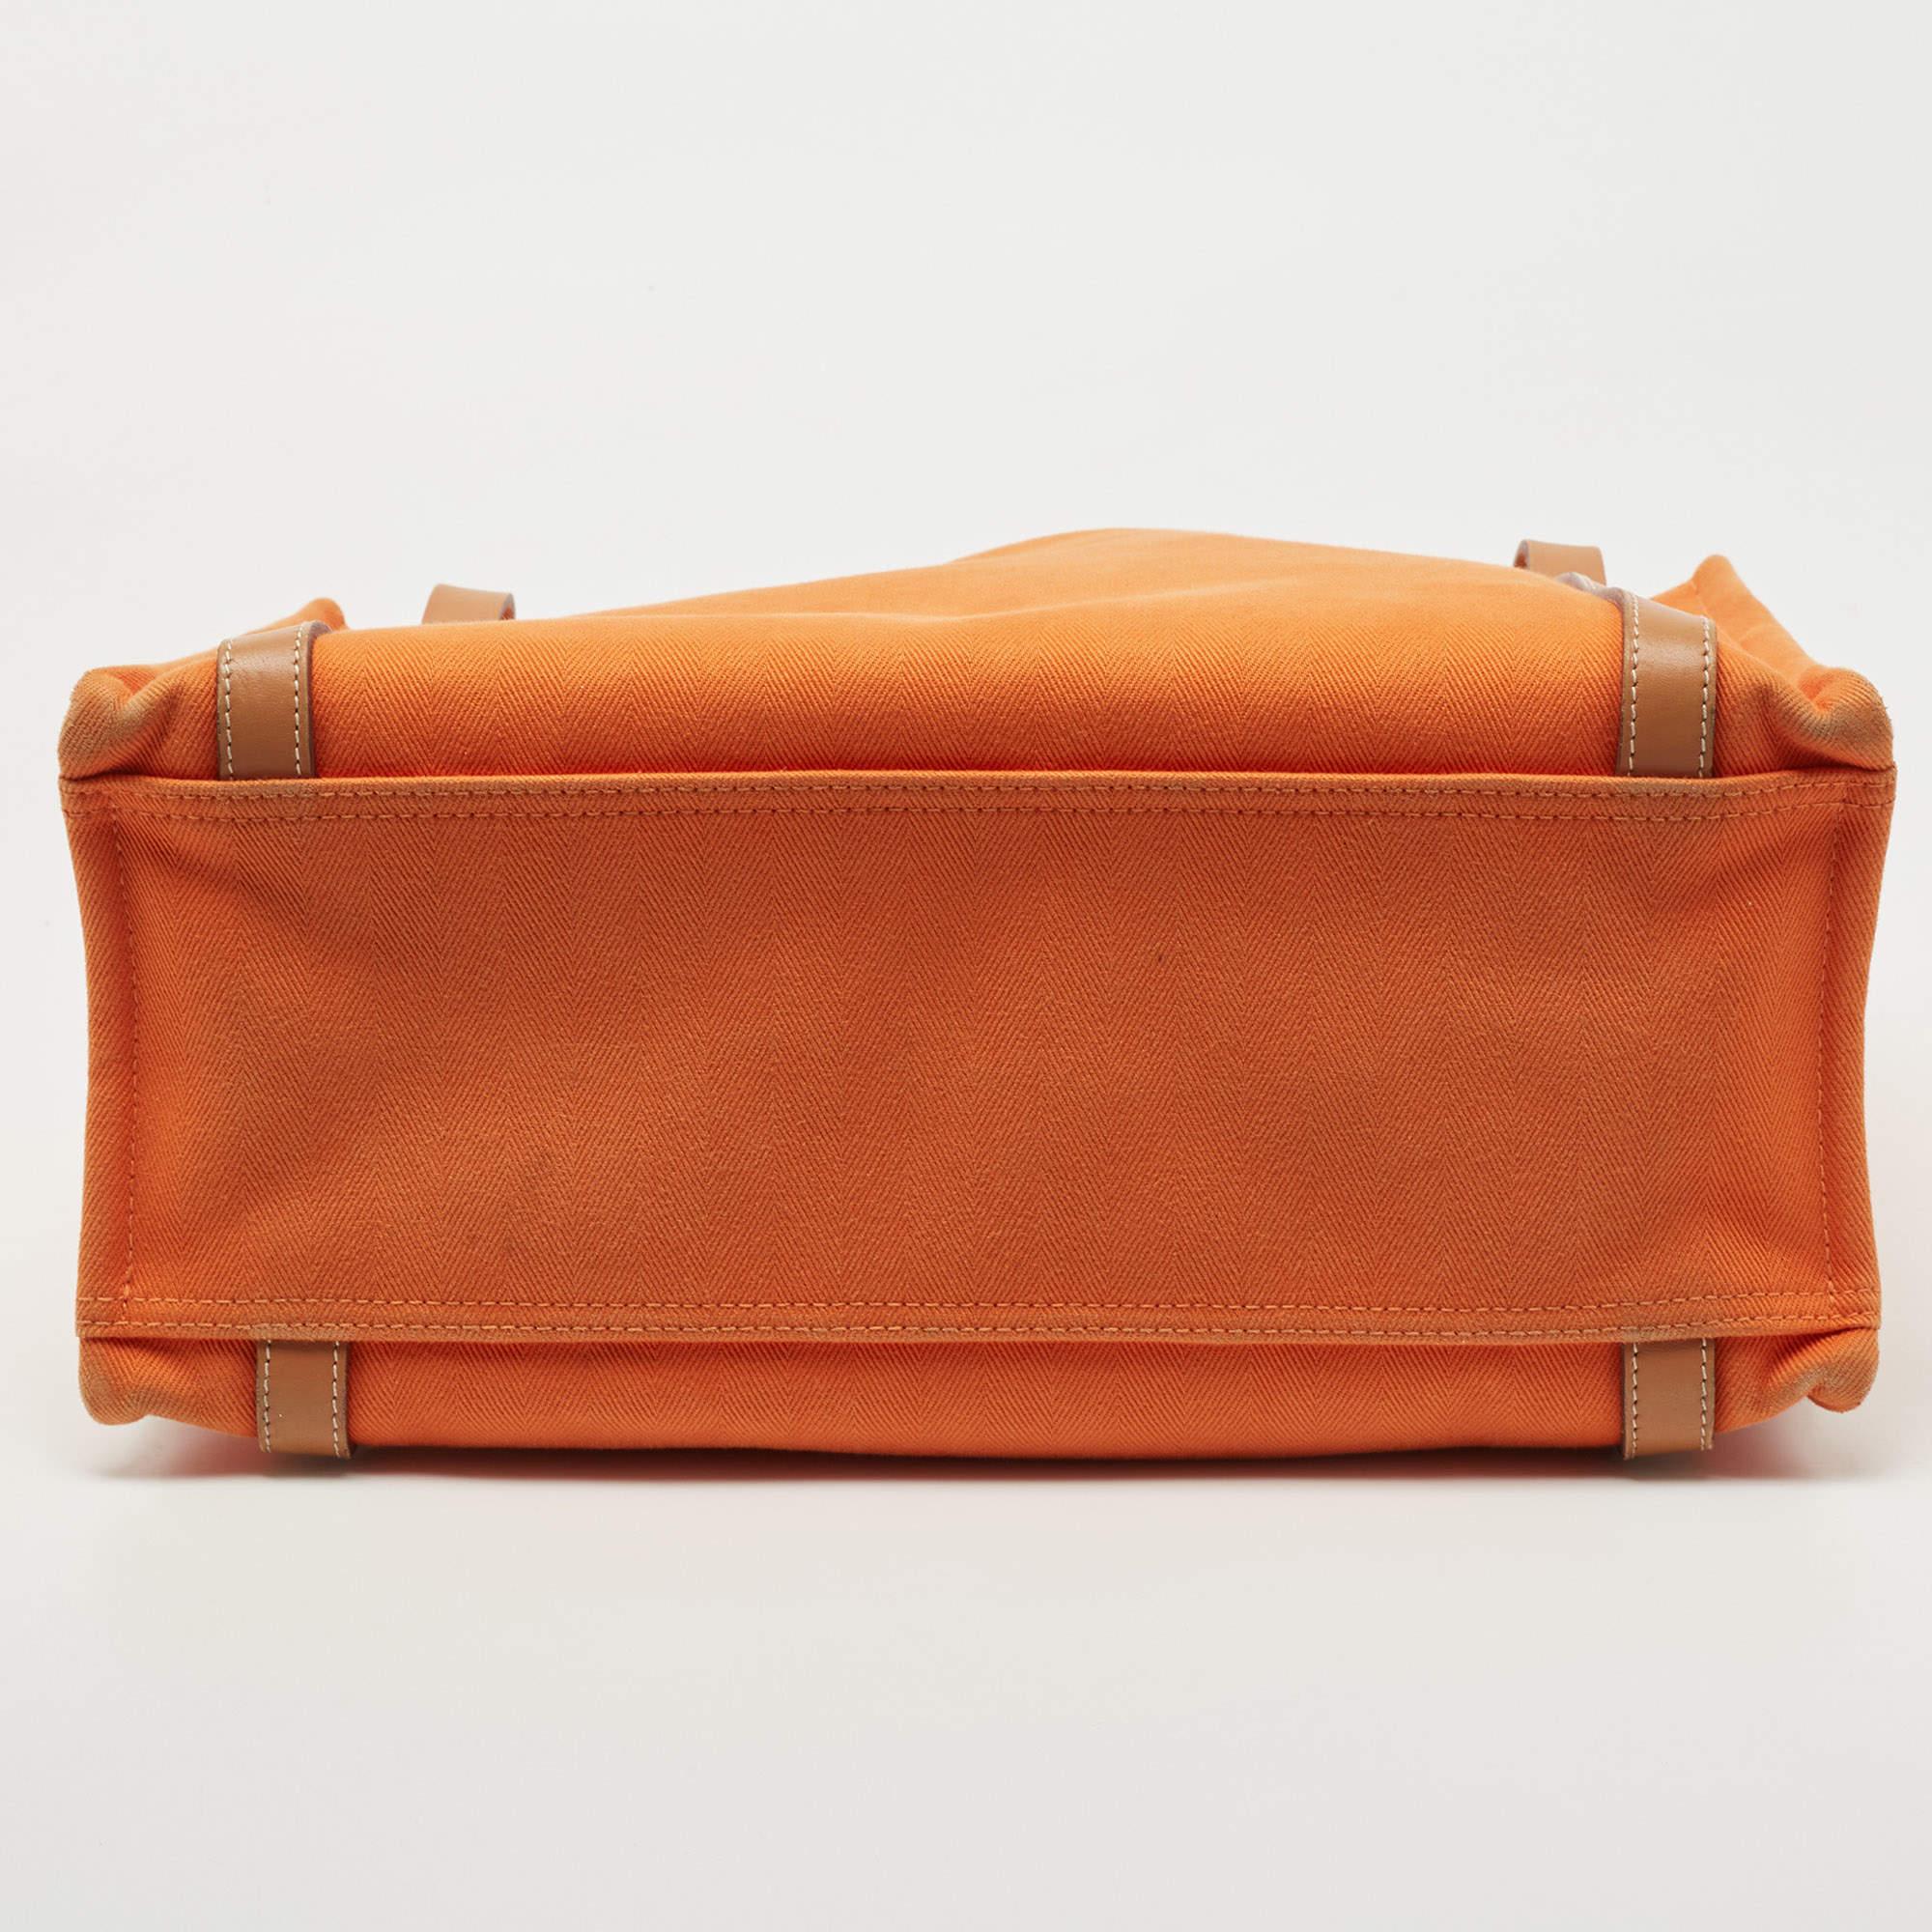 Hermes Orange/Natural Canvas and Leather Cabalicol Bag 1